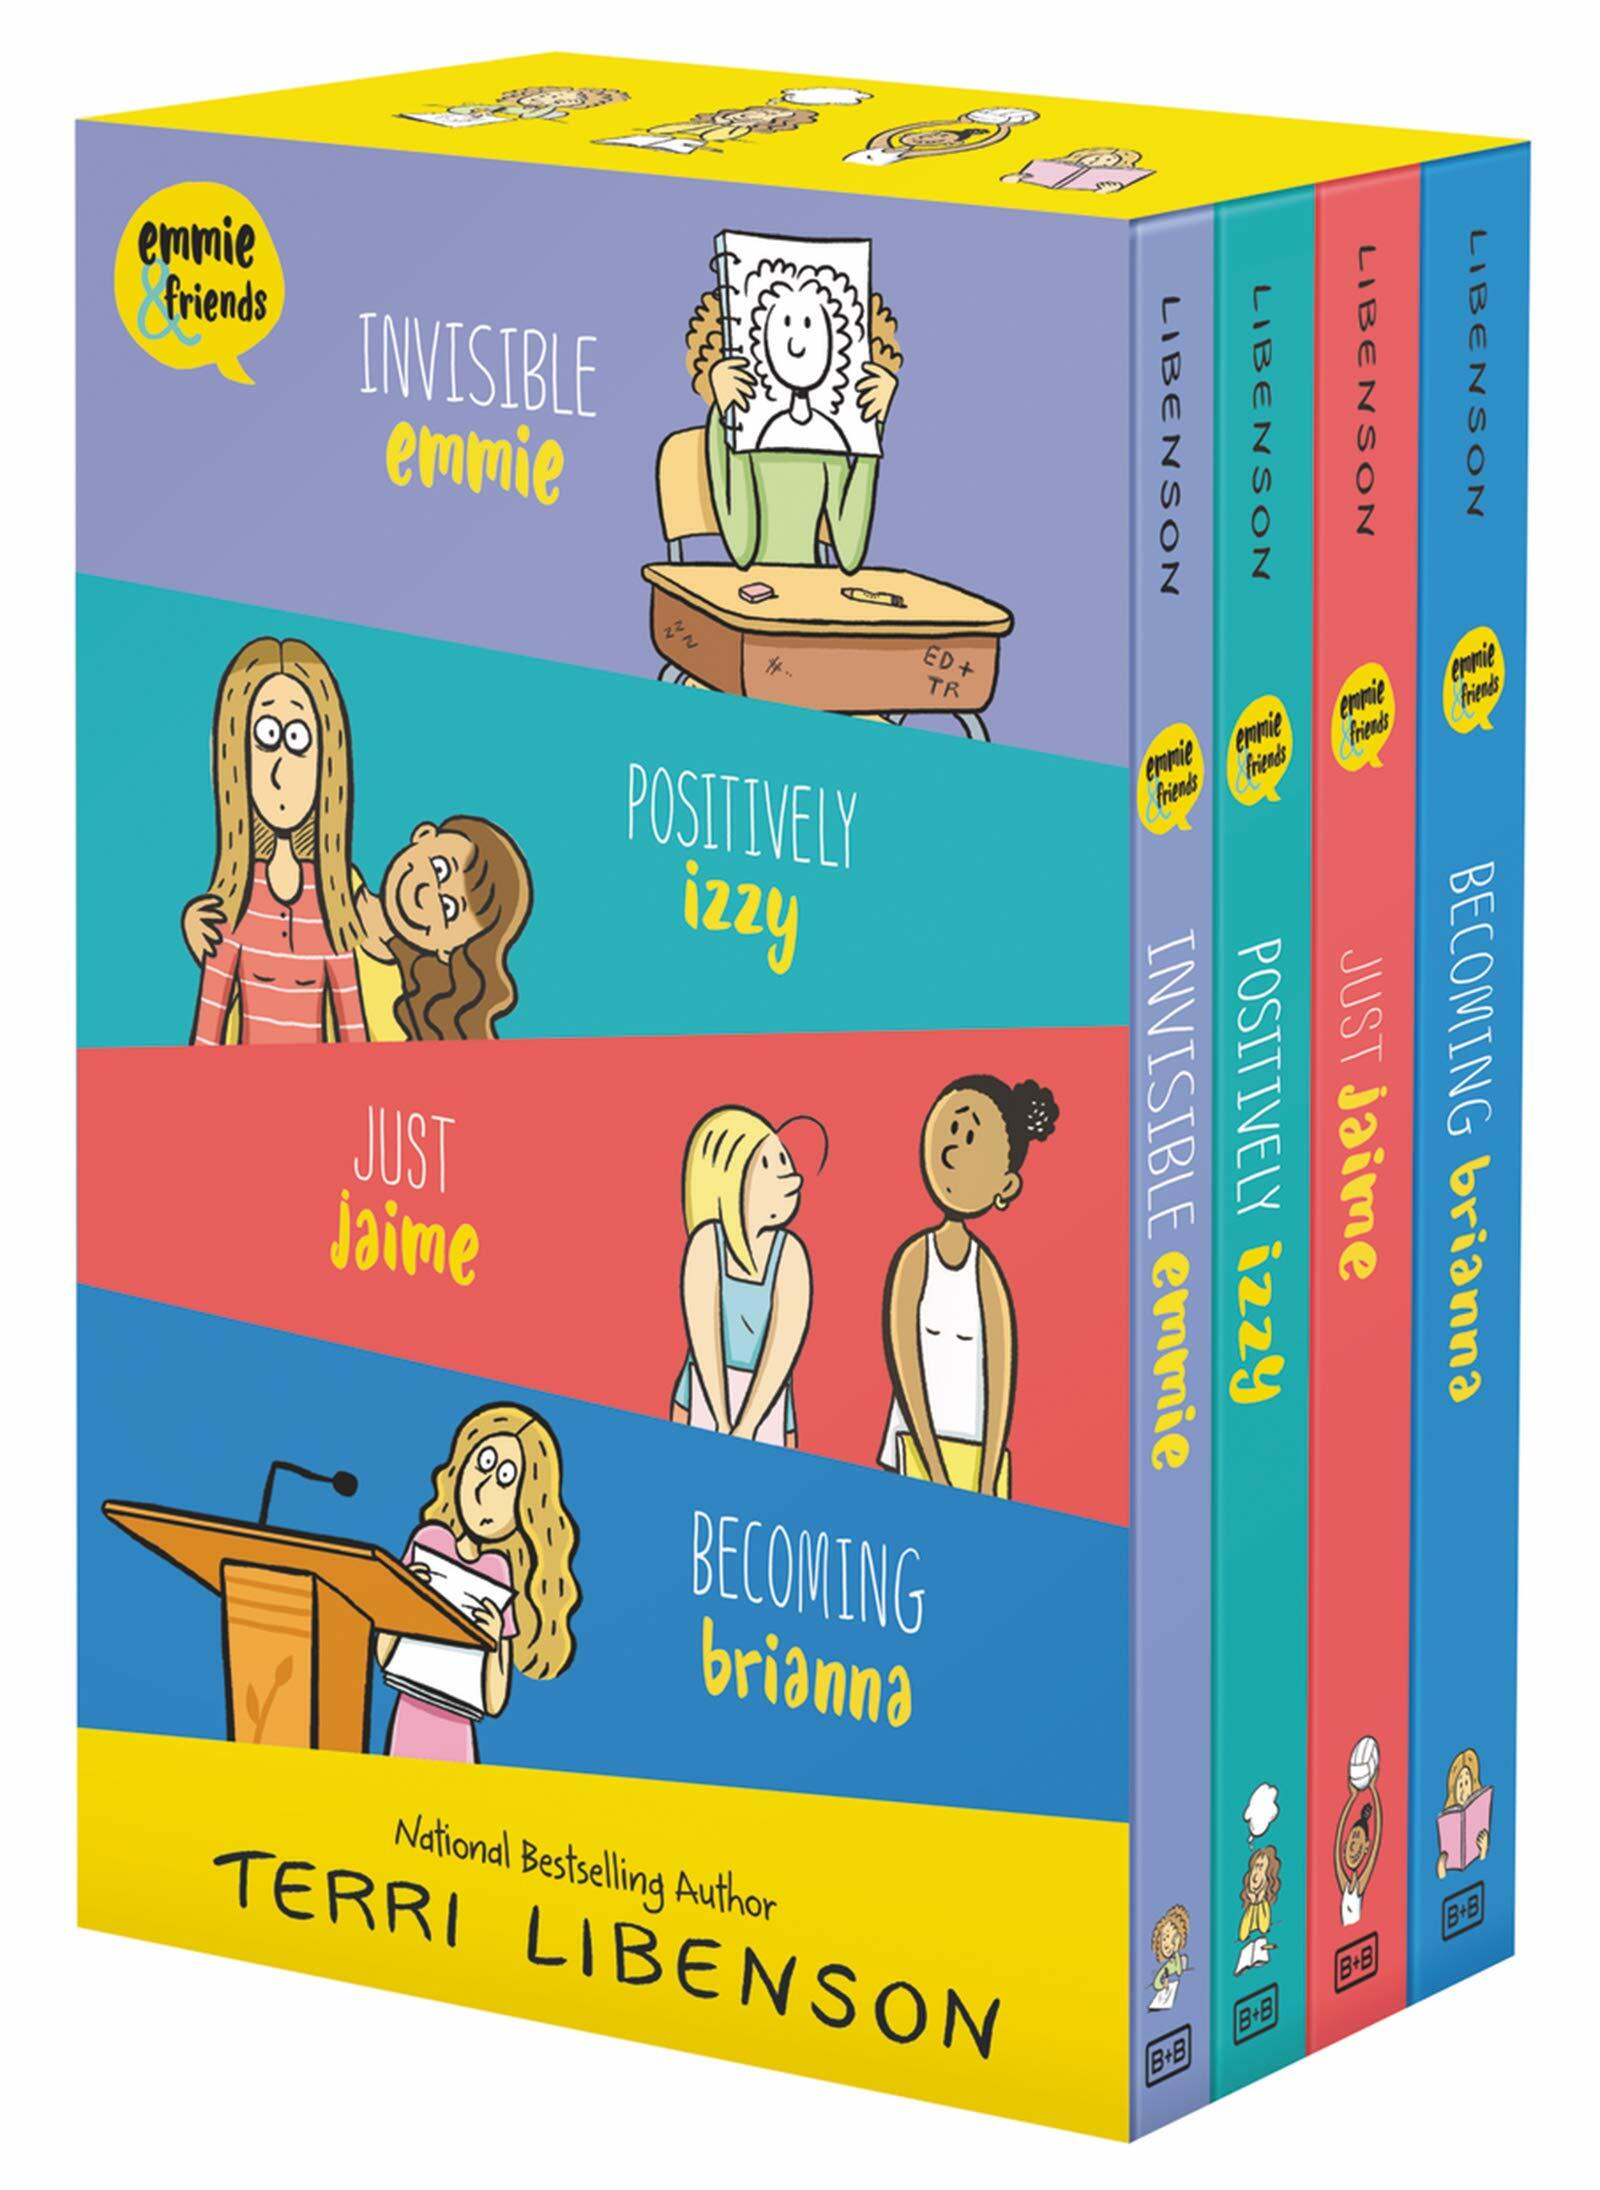 Emmie & Friends 4-Book Box Set: Invisible Emmie, Positively Izzy, Just Jaime, Becoming Brianna (Paperback)